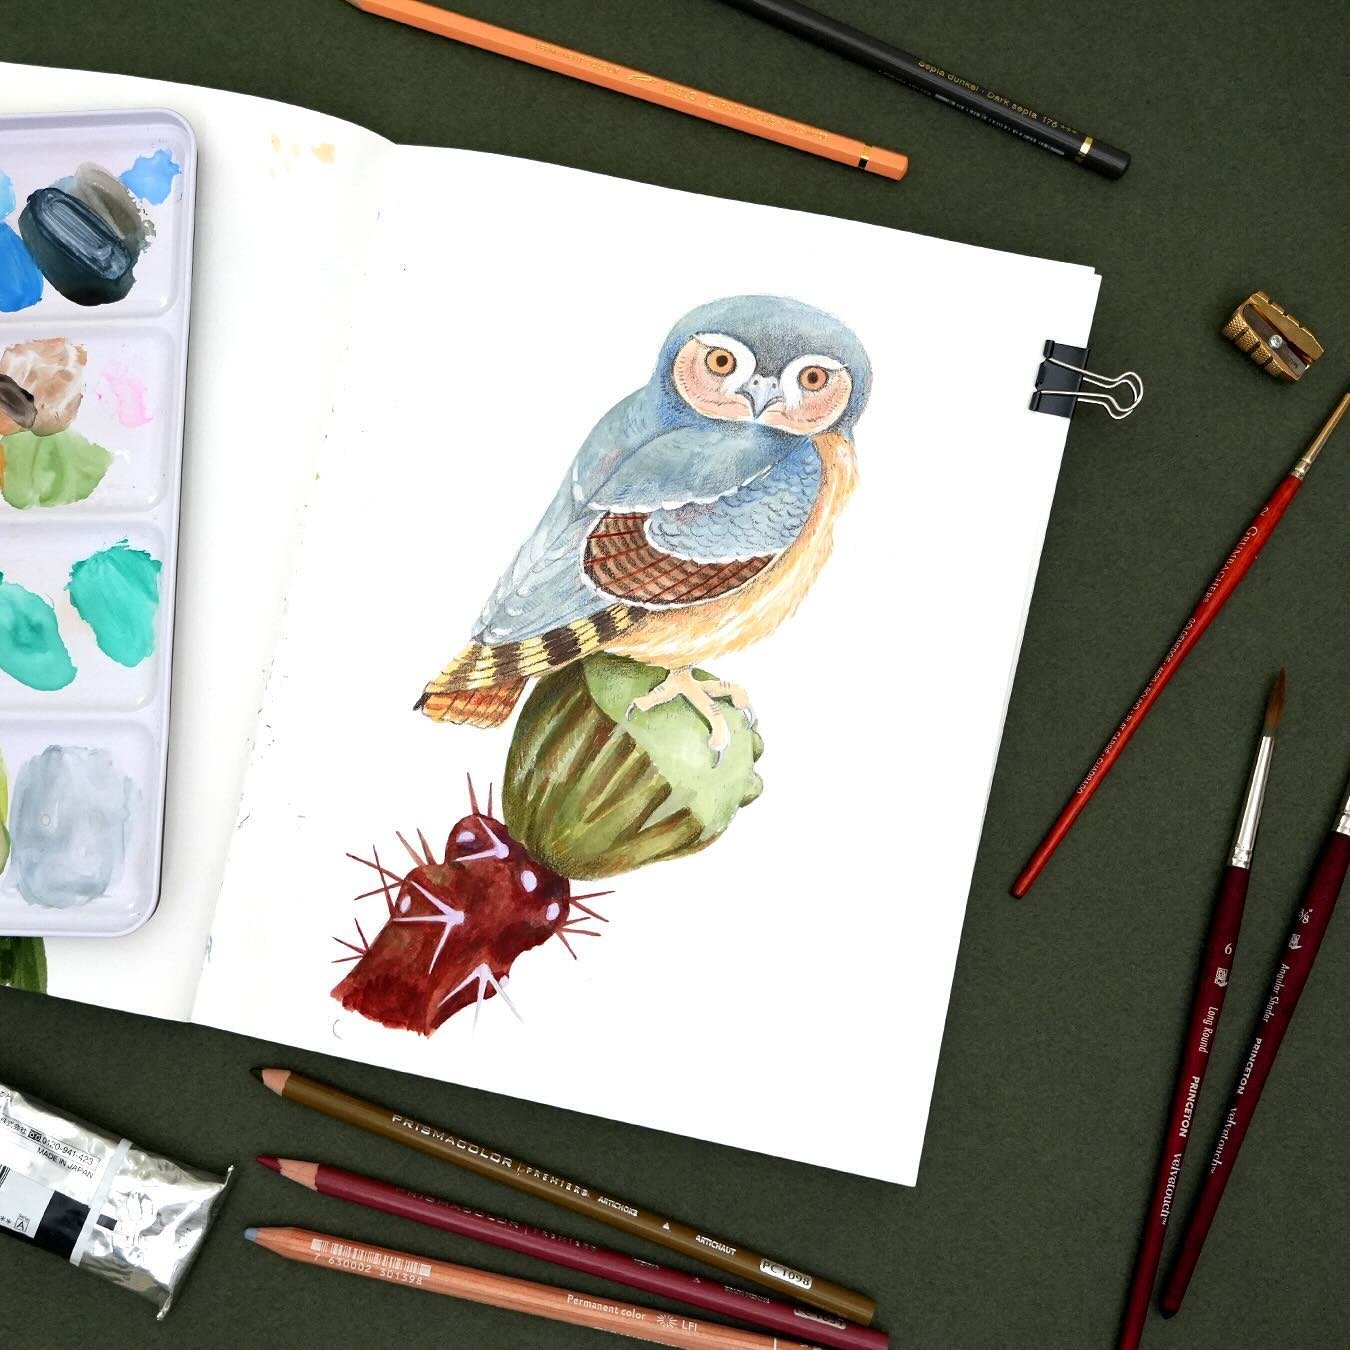 This little owl was done for the Bring Spring art challenge! I loved illustrating this little fella. Looking forward to creating art around the other prompts as well. 😊

Supplies: Strathmore mixed media sketchbook, gouache, watercolor, and colored p